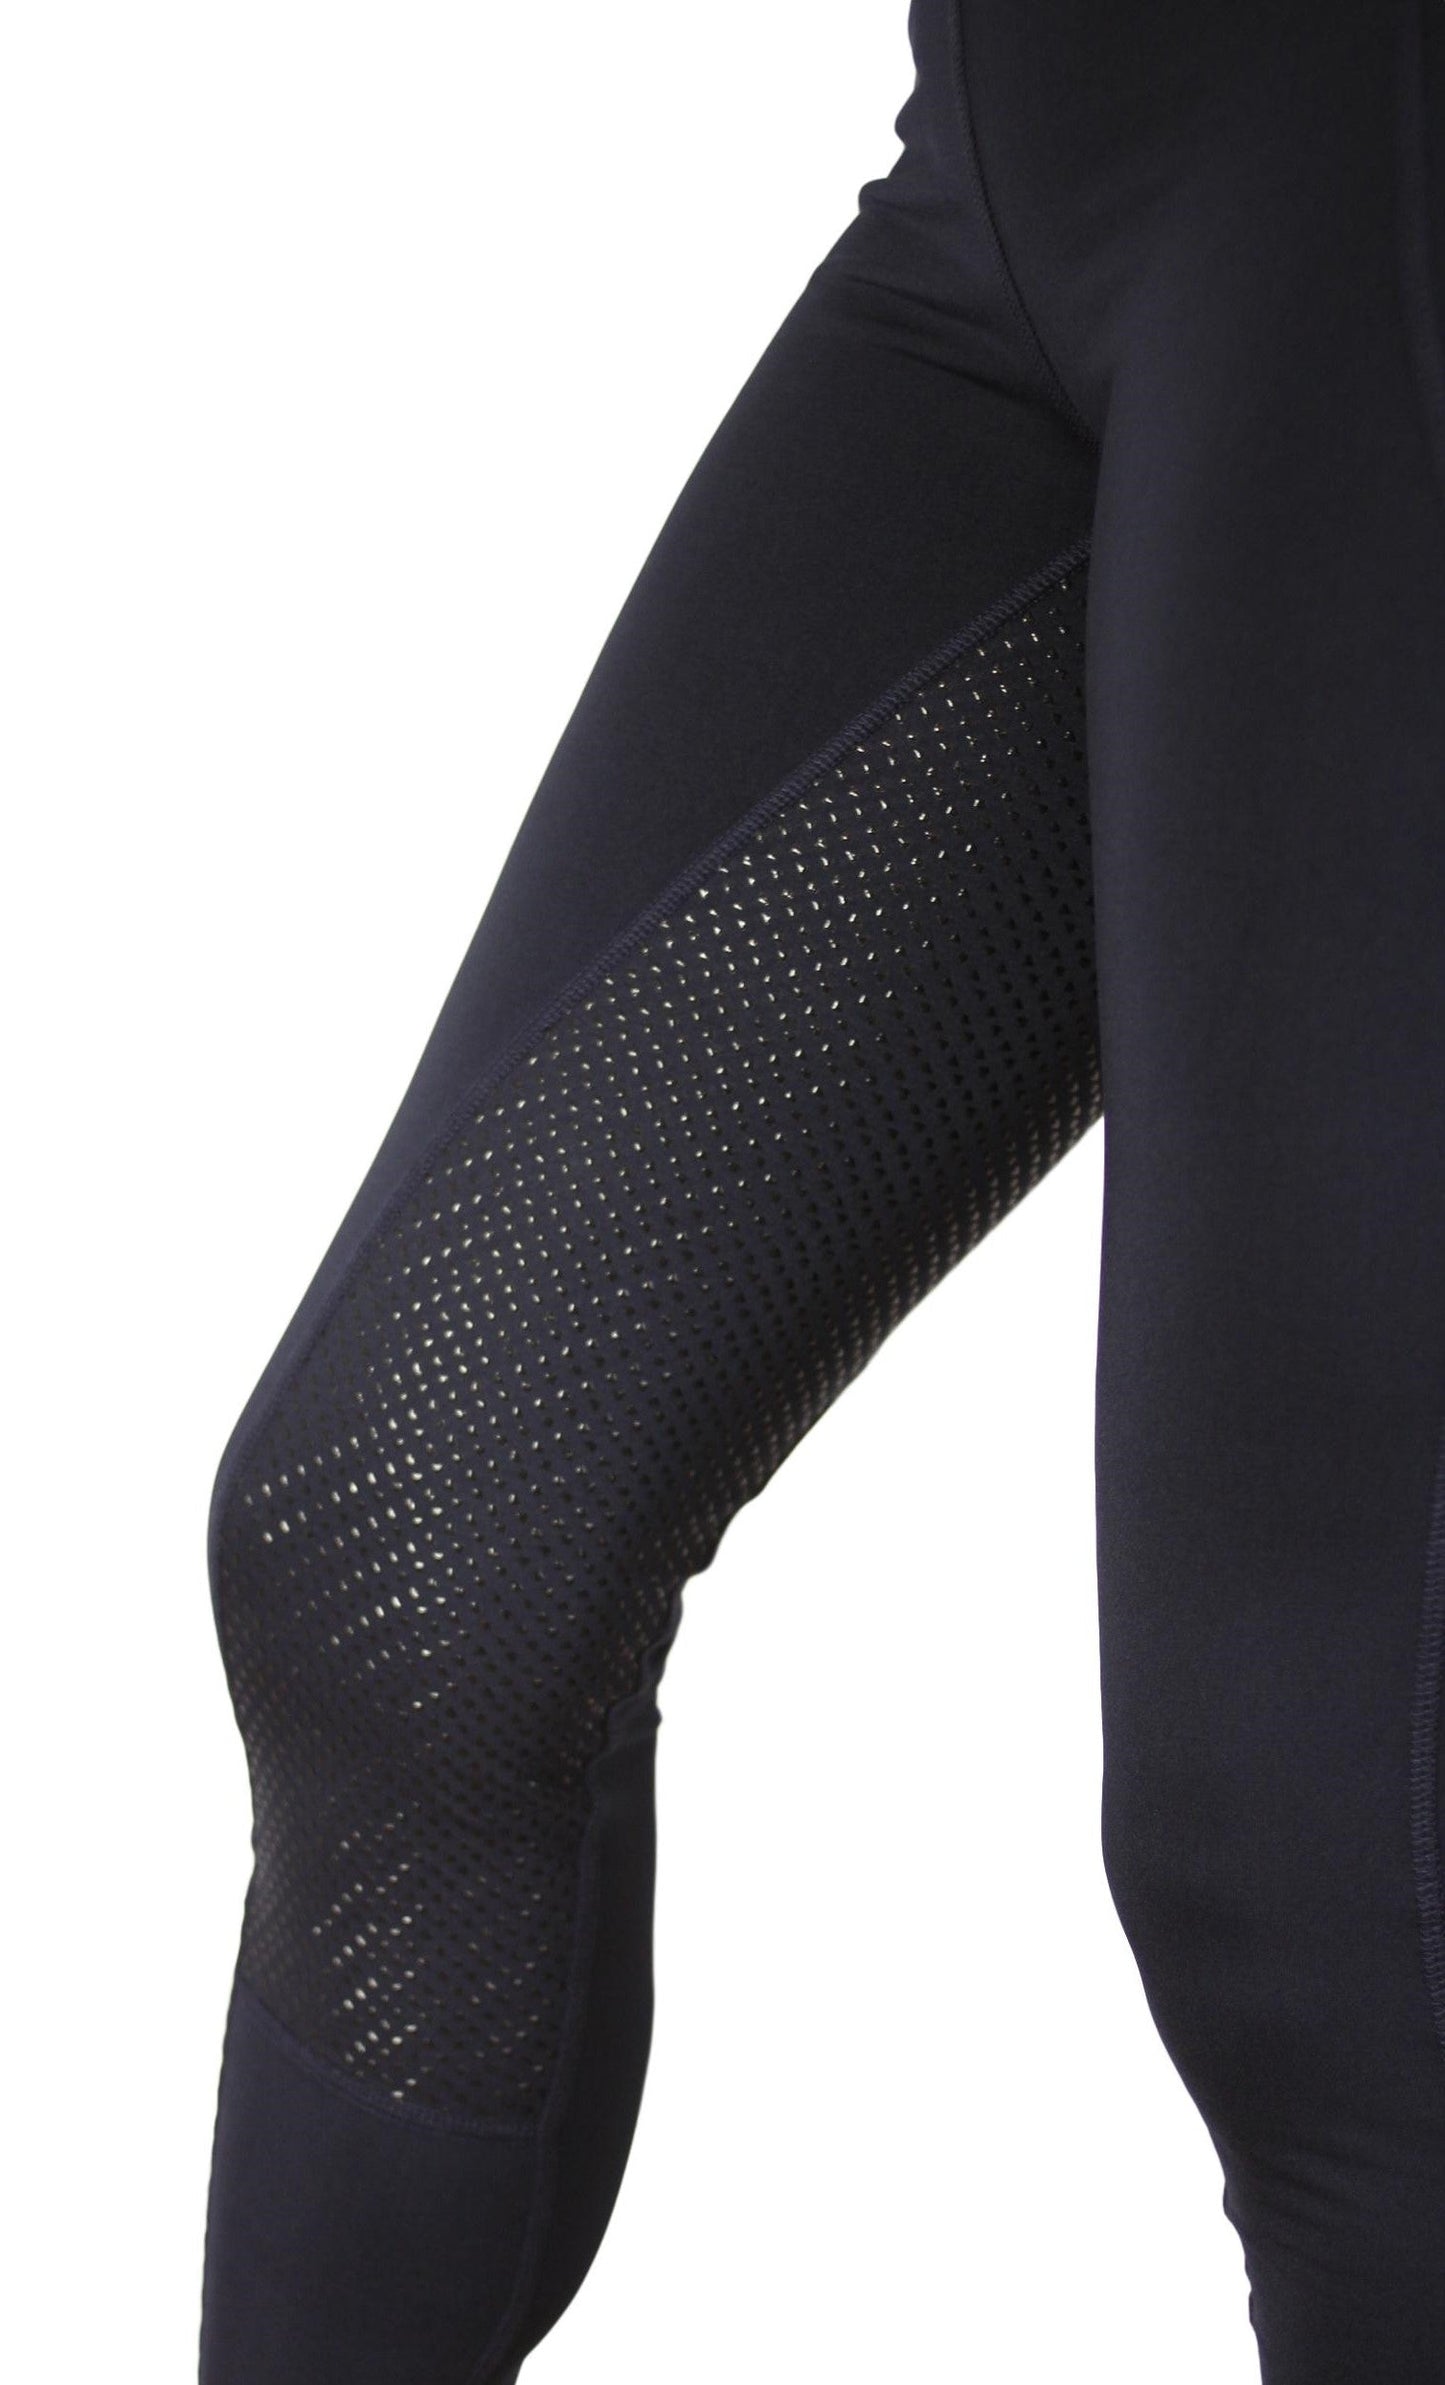 Close-up of black horse riding tights with ventilated thigh panel.